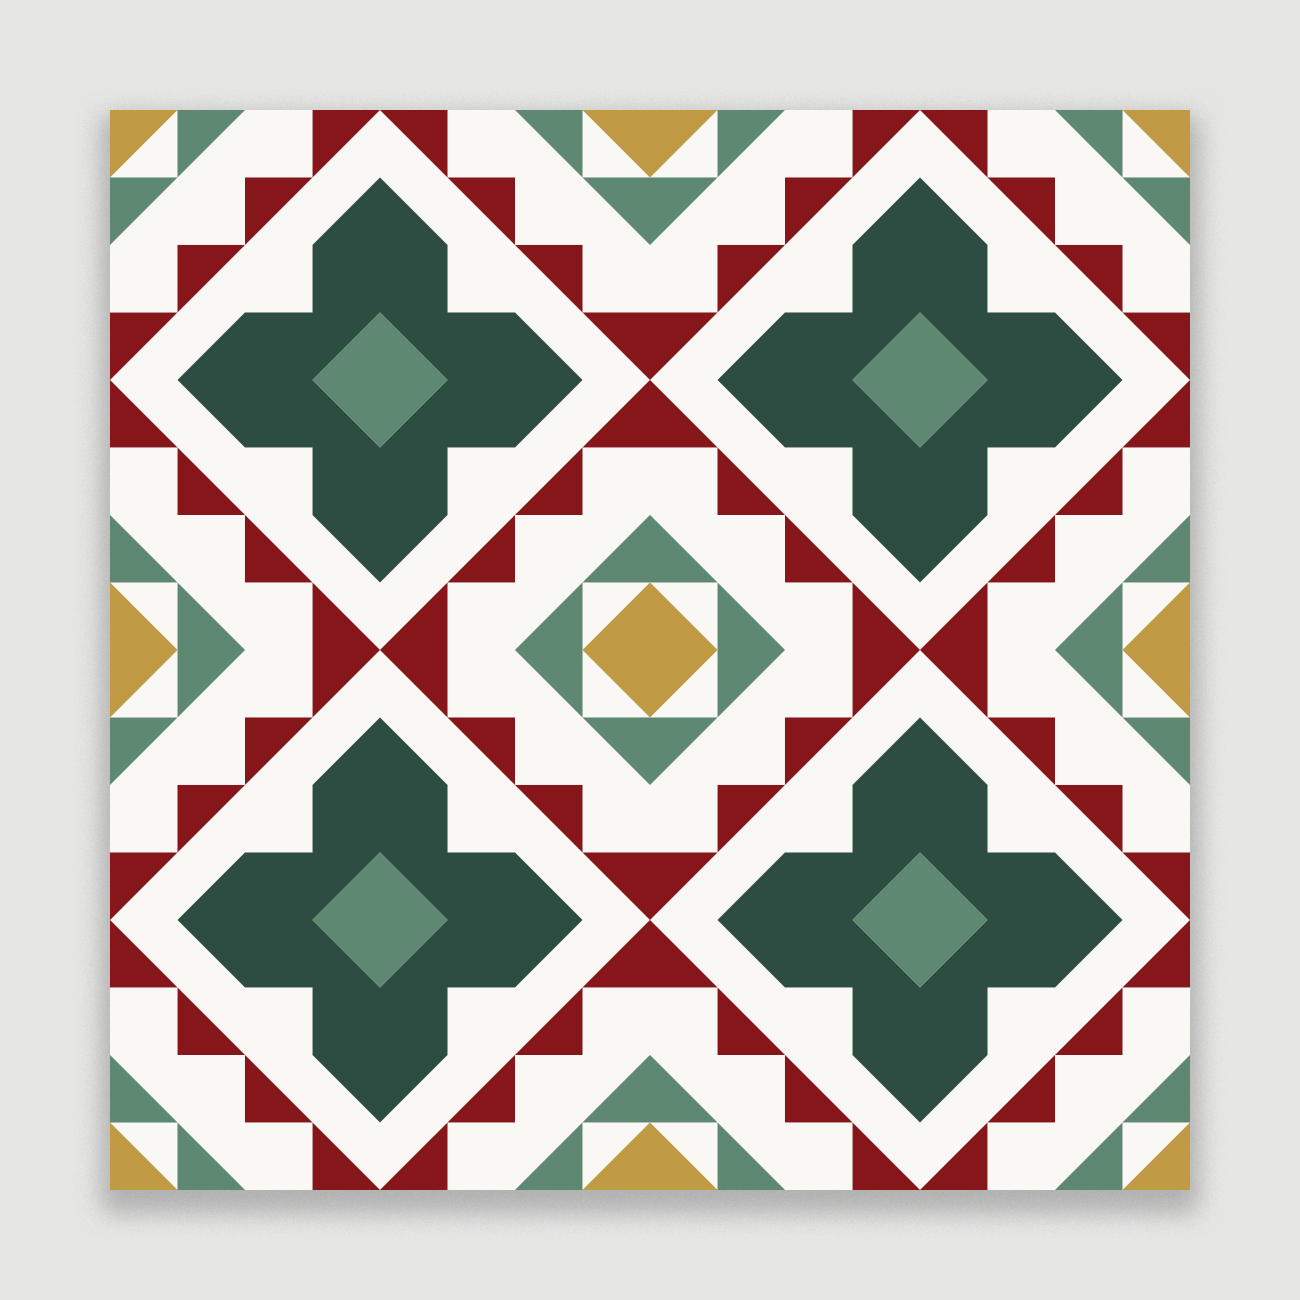 Spruce Woods Paper Pattern - Pack of 5